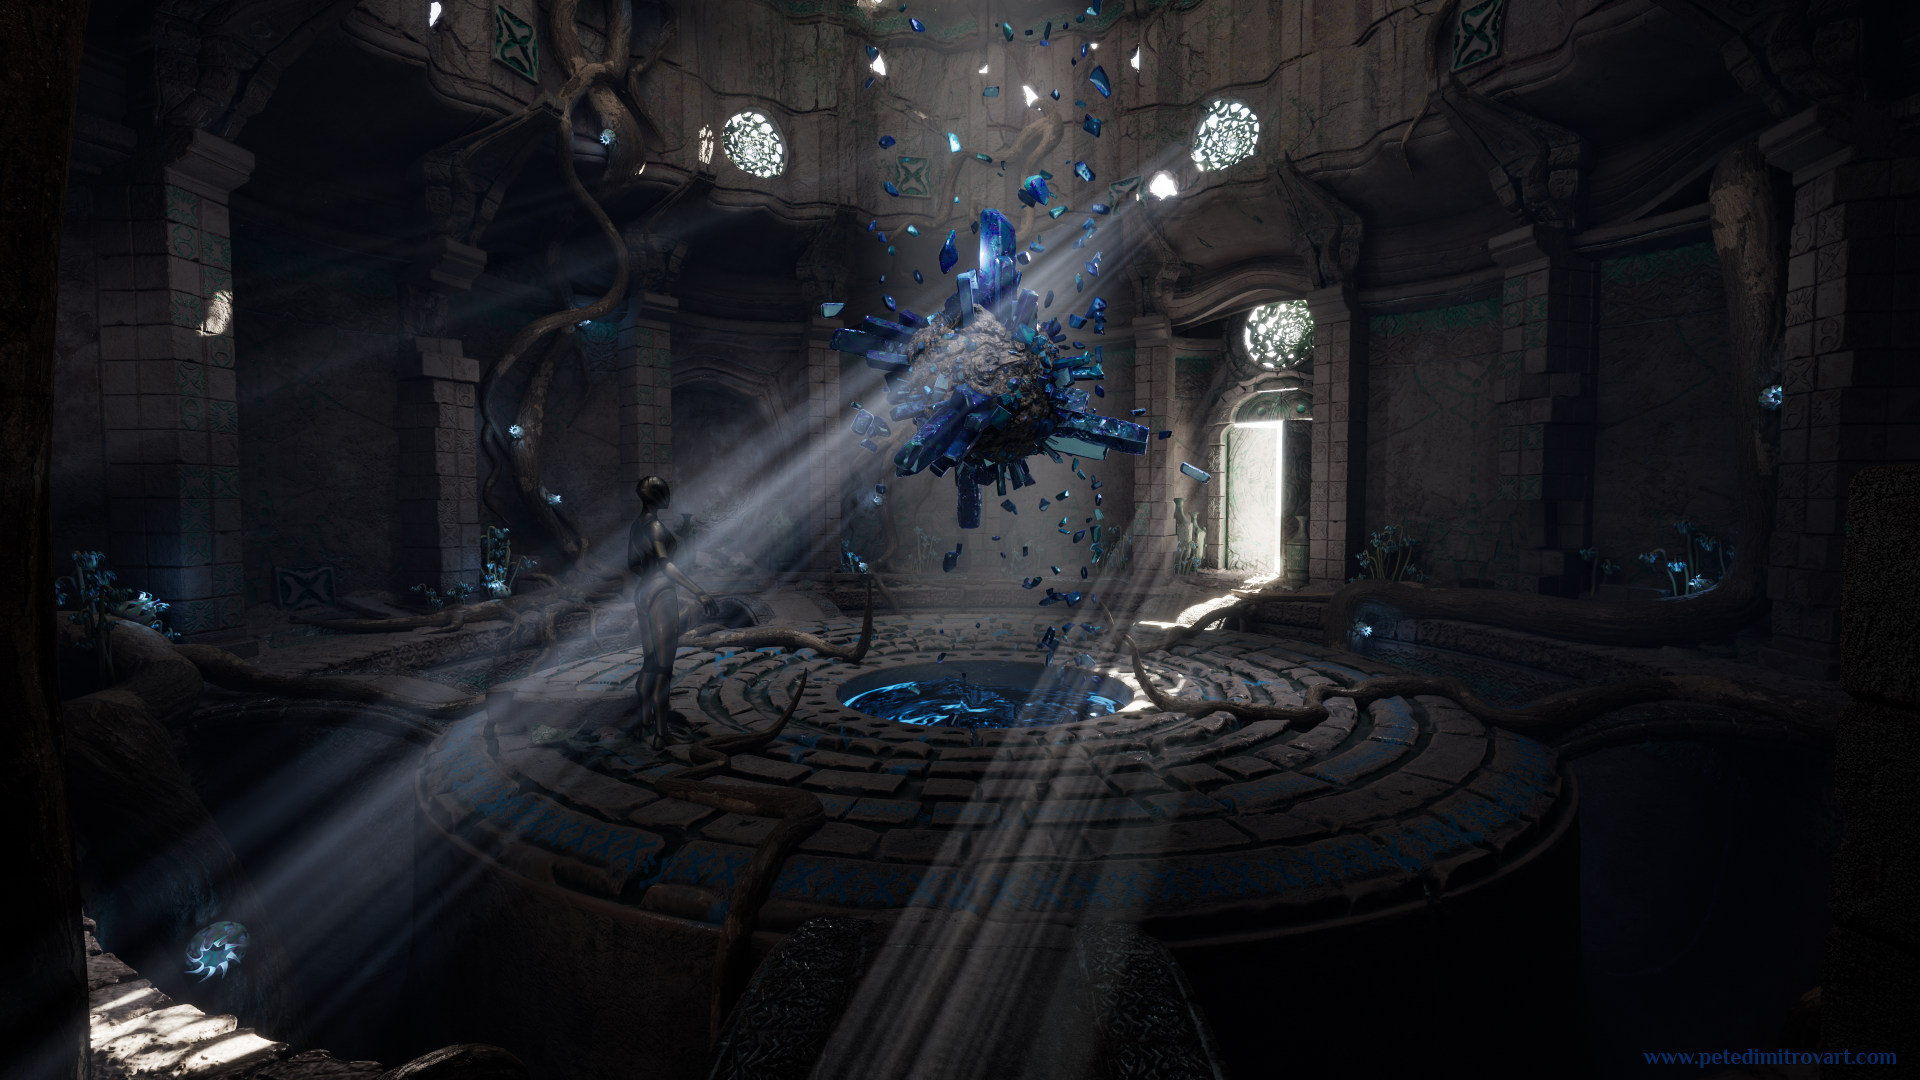 Screenshot from the main camera angle. Shows the crystal prop duplicated and rotated multiple times, creating an “explosion” of crystals. Or a “biblically accurate crystal” as I described it before. It’s pieces are floating in the middle of the room, right above the central circular platform.